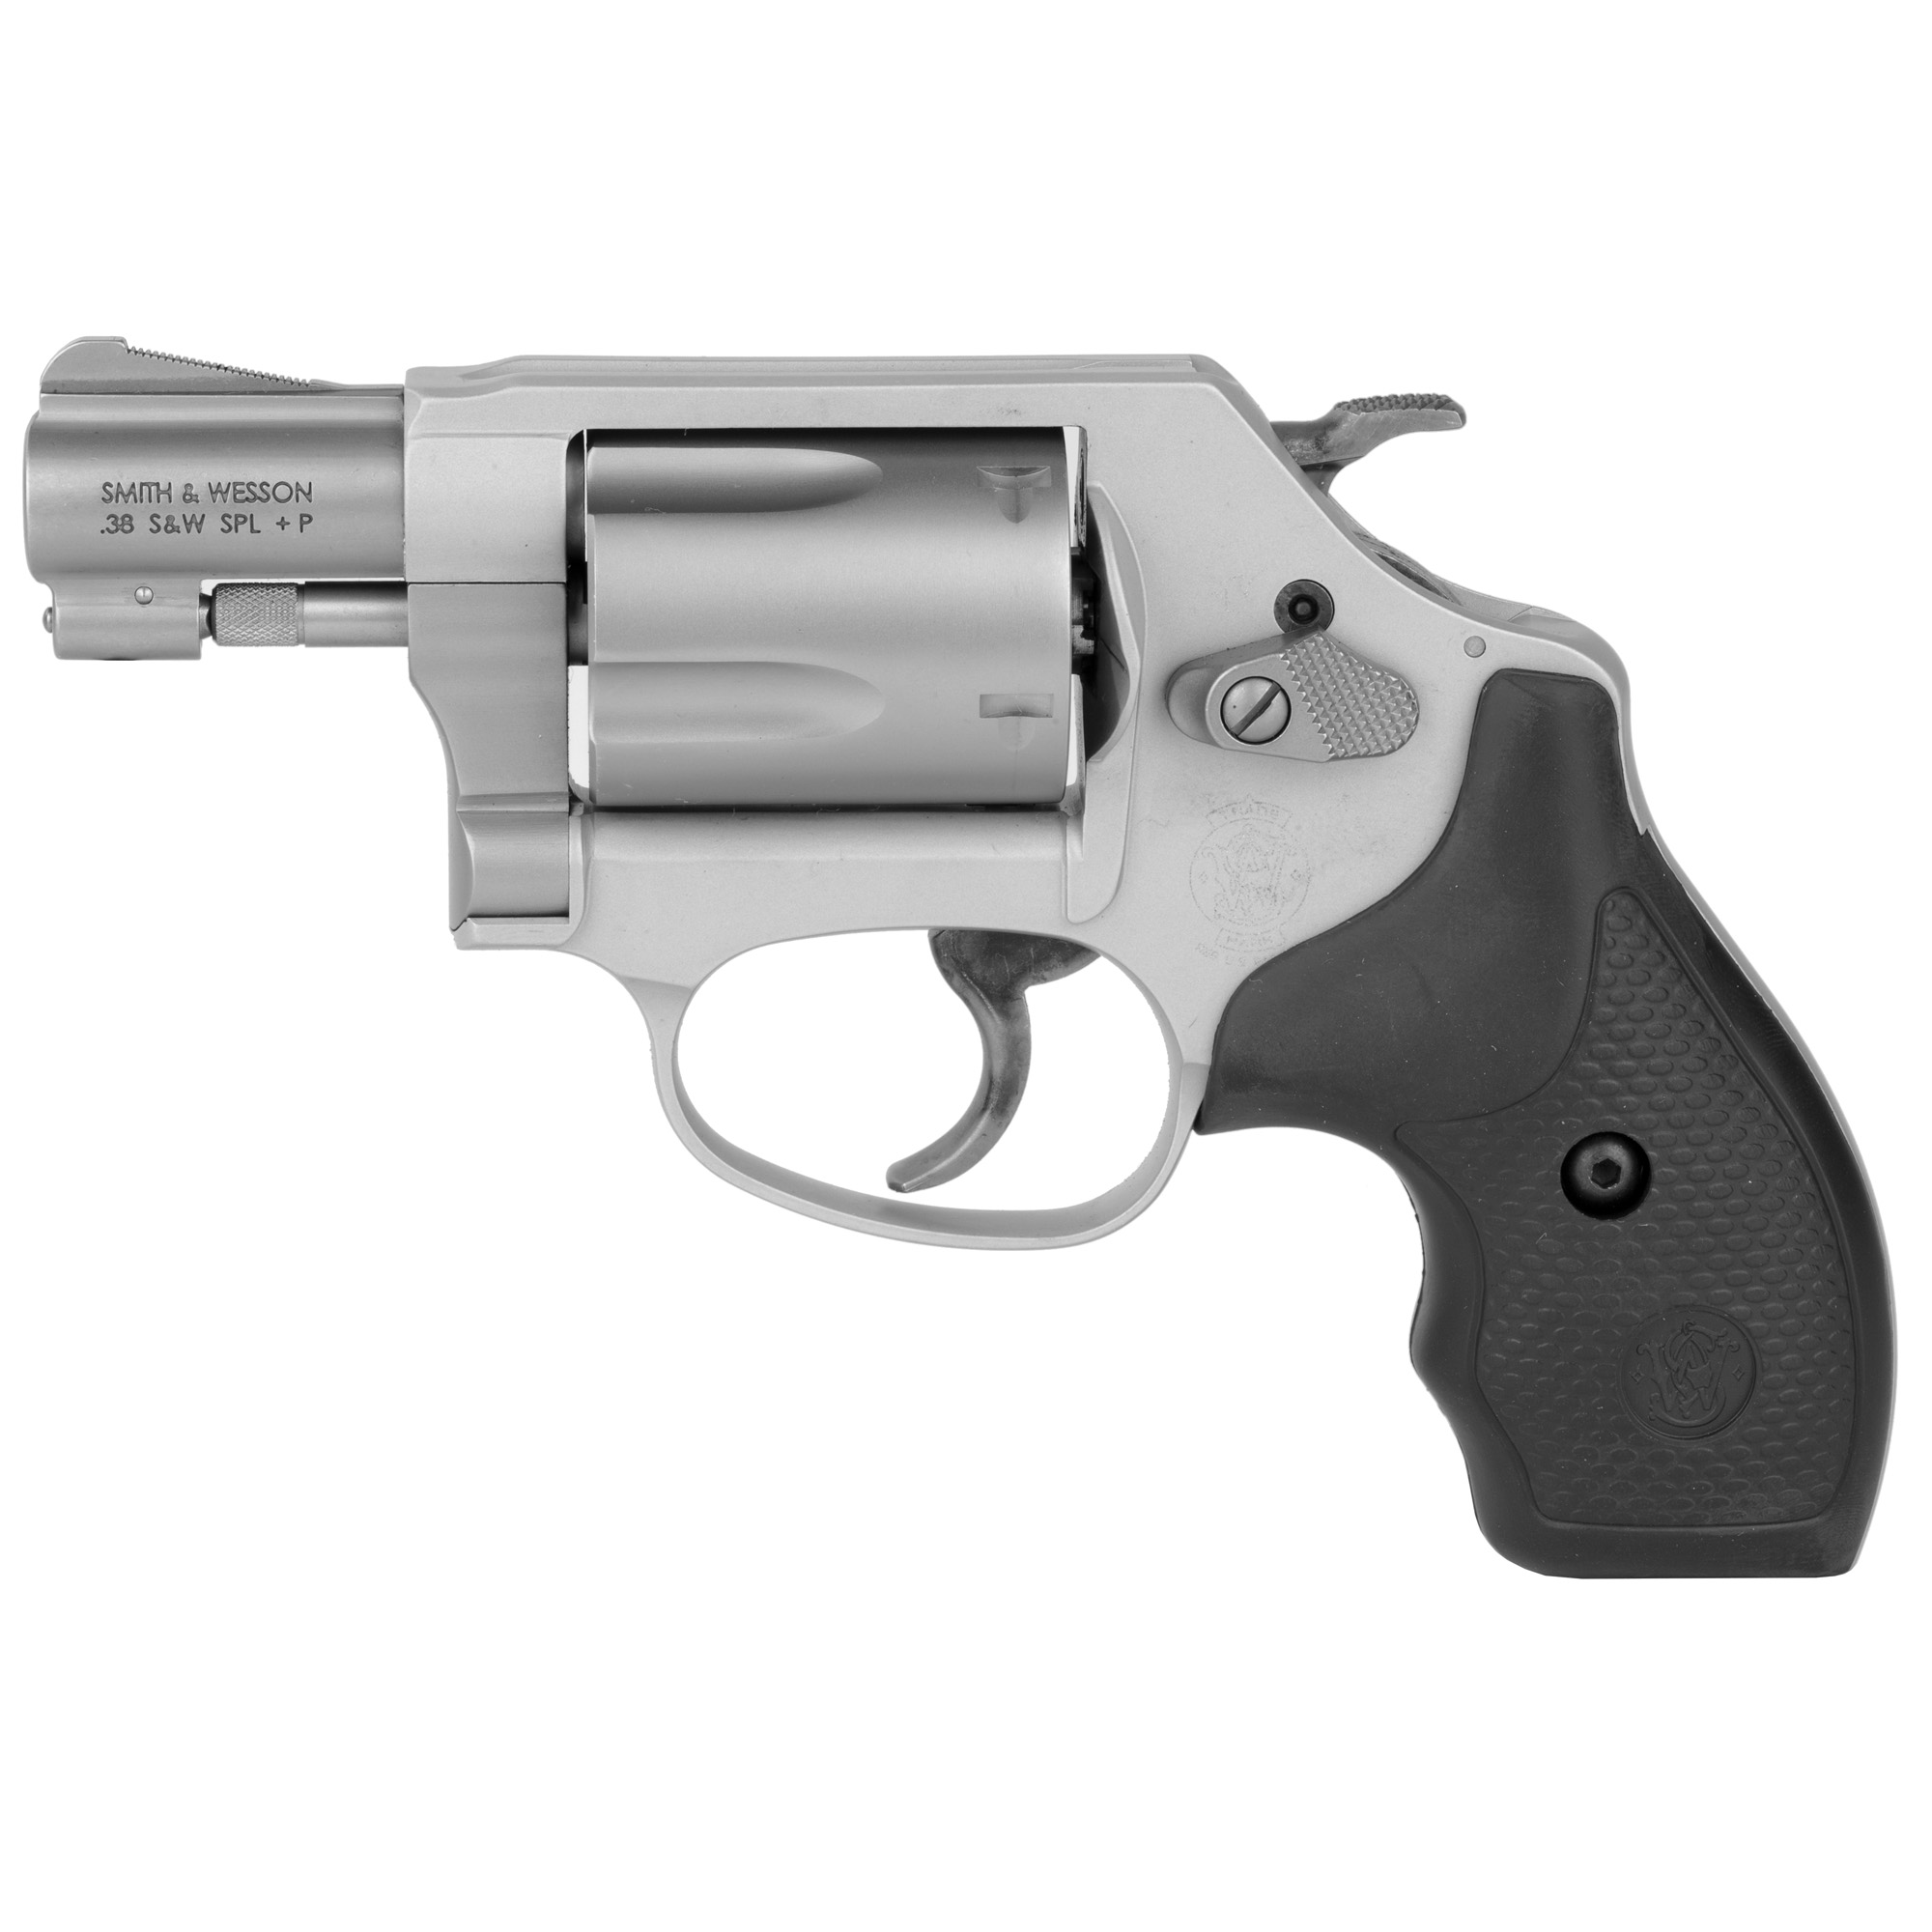 https://cityarsenal.com/product/smith-wesson-637-38-special-p-airweight-revolver-matte-silver-finish-163050/